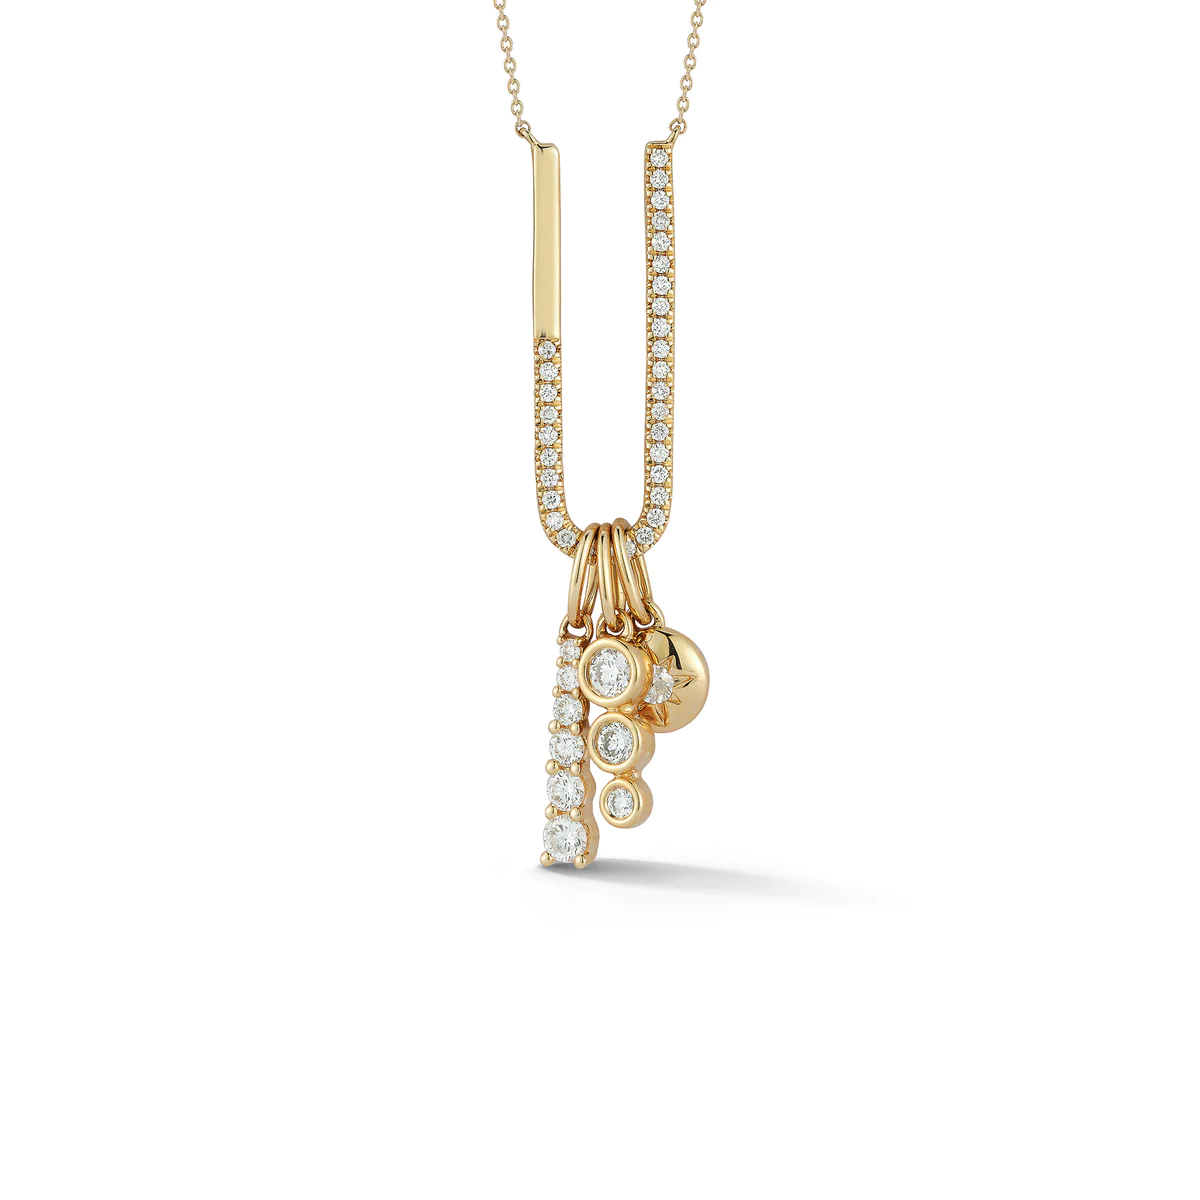 14K Yellow Gold 3 Removeable Charm Necklace